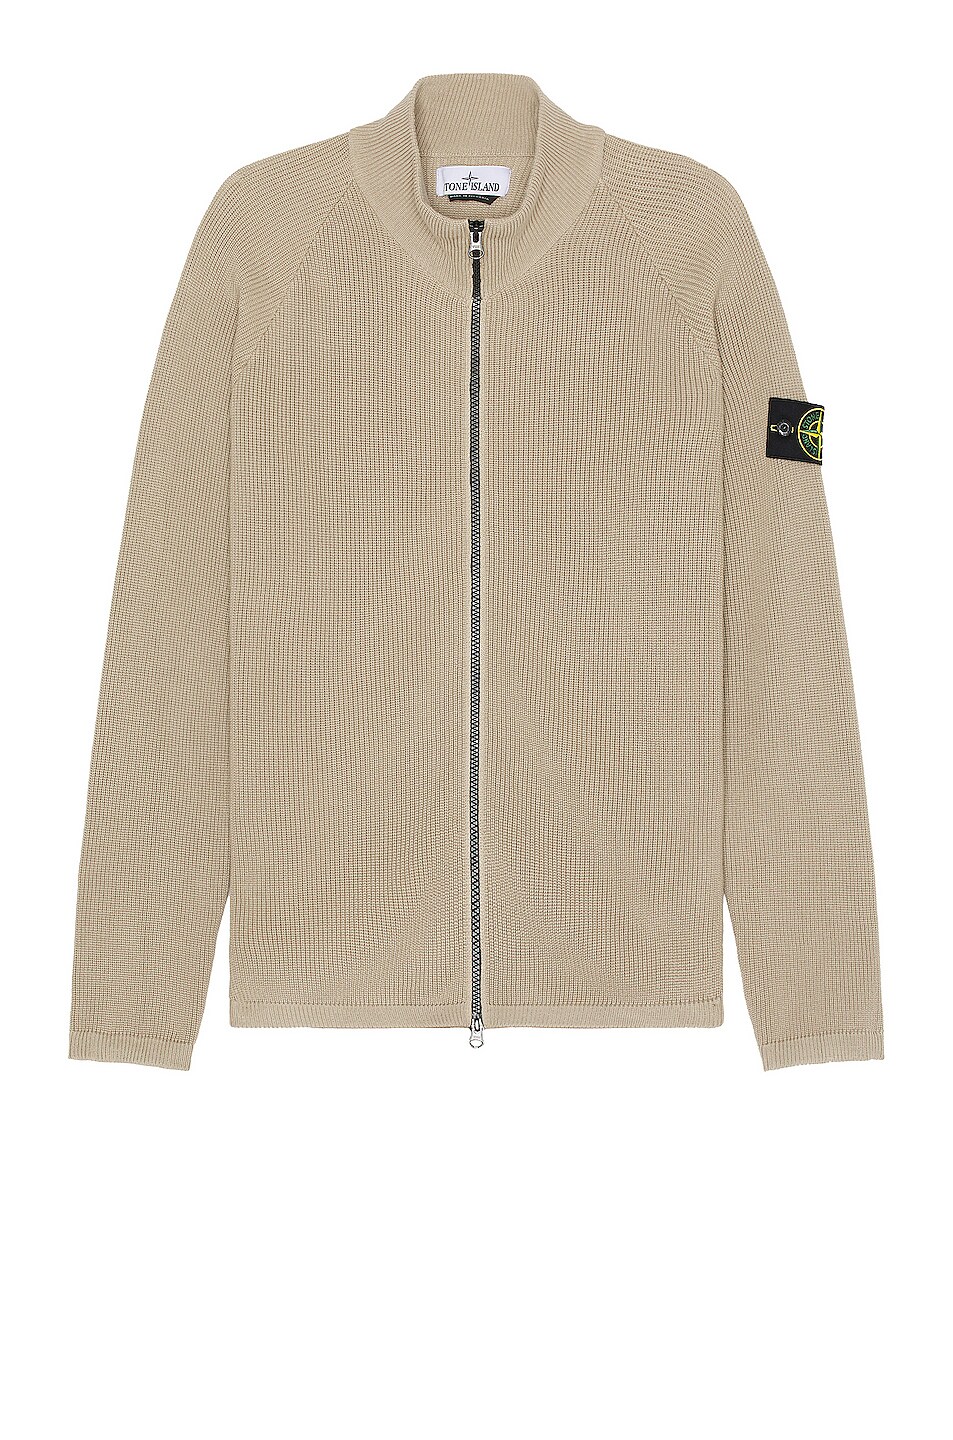 Image 1 of Stone Island Zip Up Sweater in Dove Grey